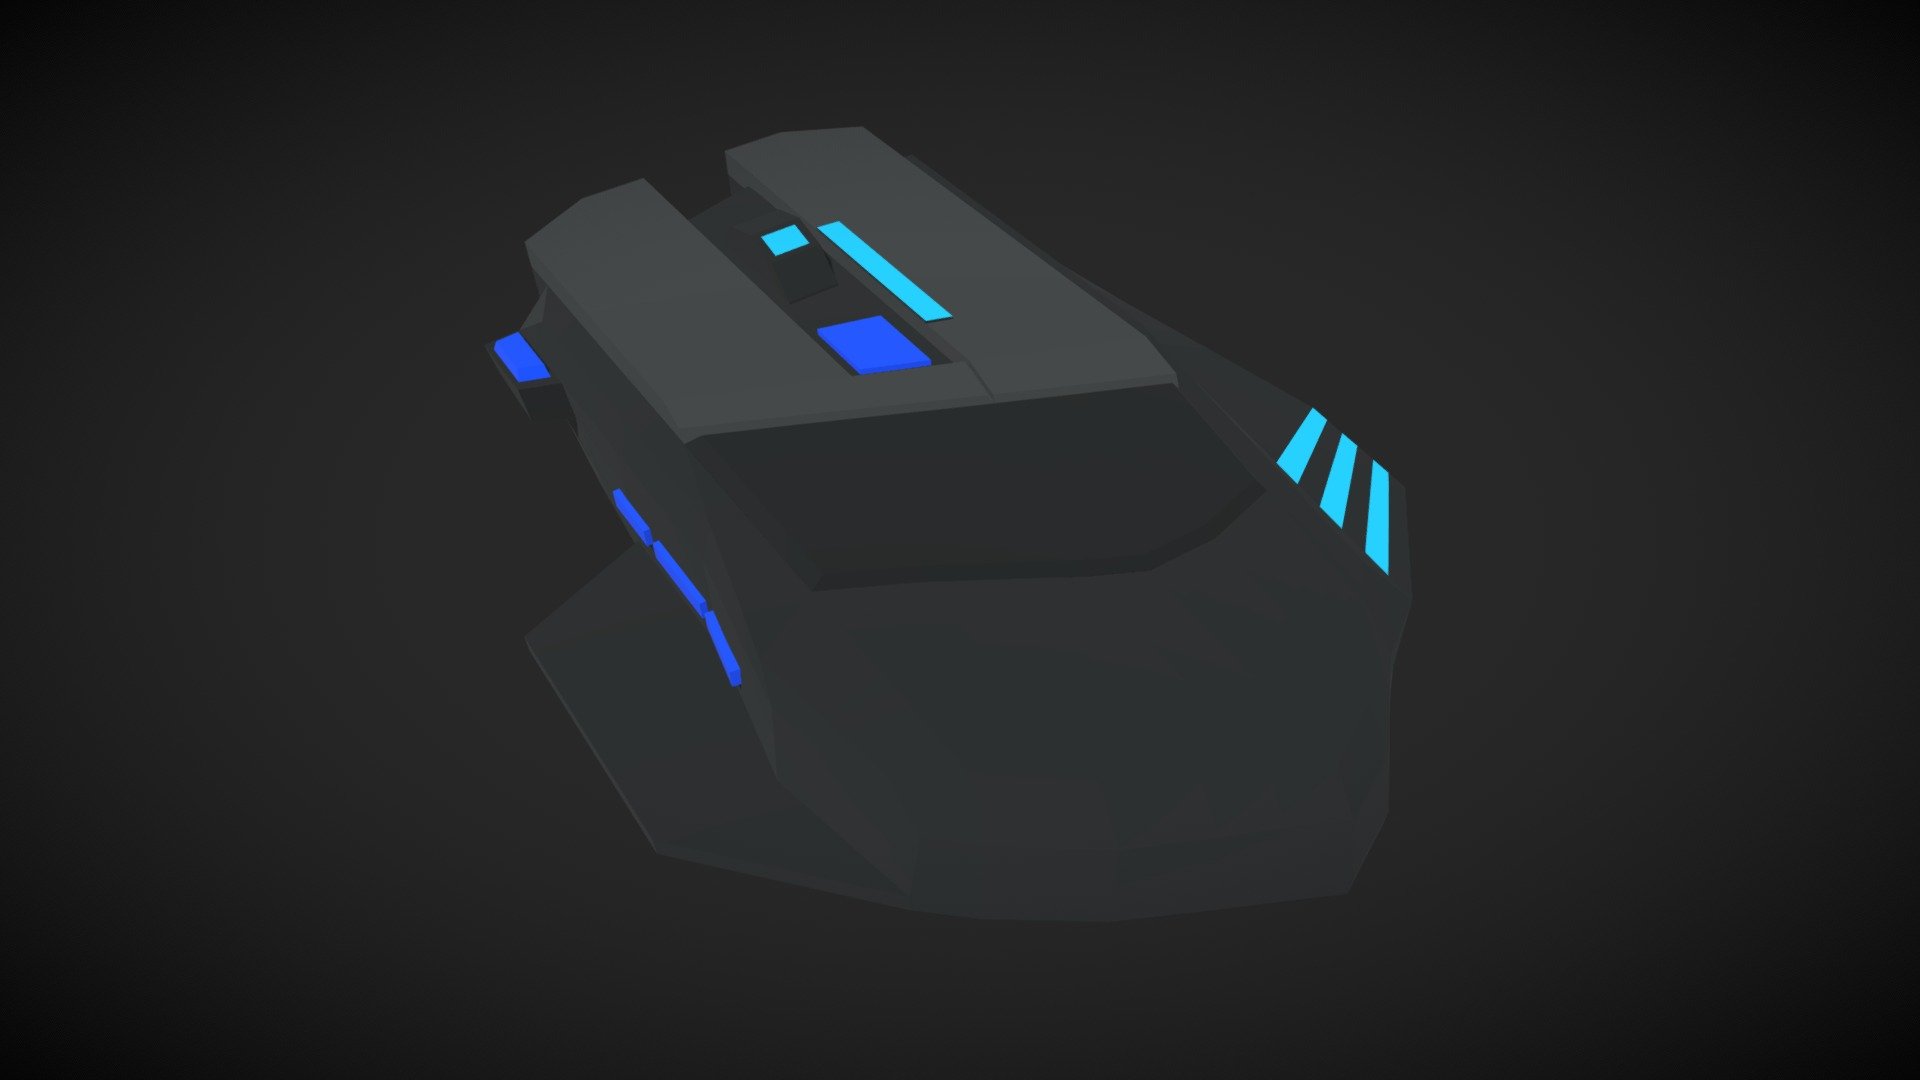 A simple Gaming Mouse in a cool Lowpoly Style for a lowpoly gamingsetup. You could use it for your next game or a littel Video. The lowpoly comic like style is timeless and cool you should try to create a video game with this kind of graphic style 3d model